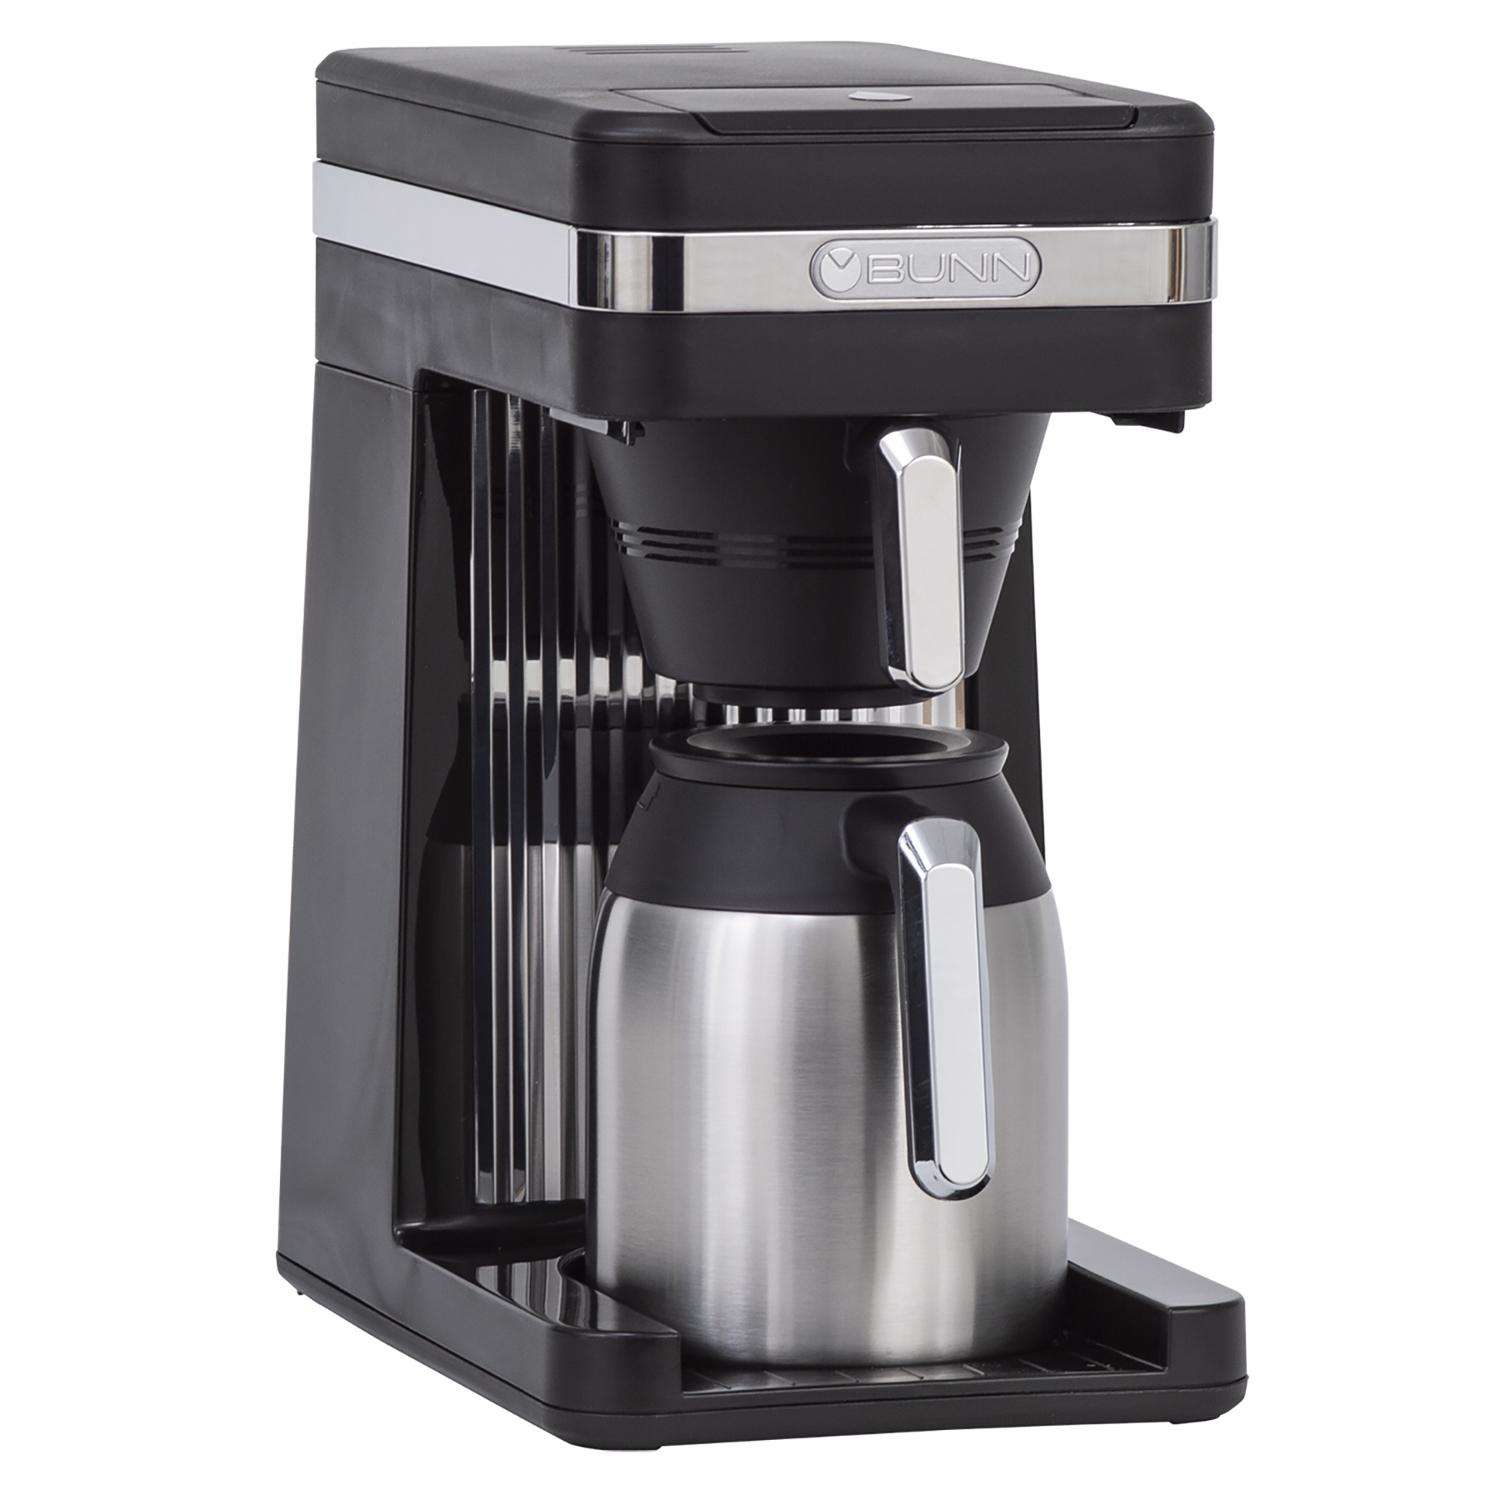 BUNN Heat N Brew Programmable Coffee Maker, 10 cup, Stainless Steel Tested